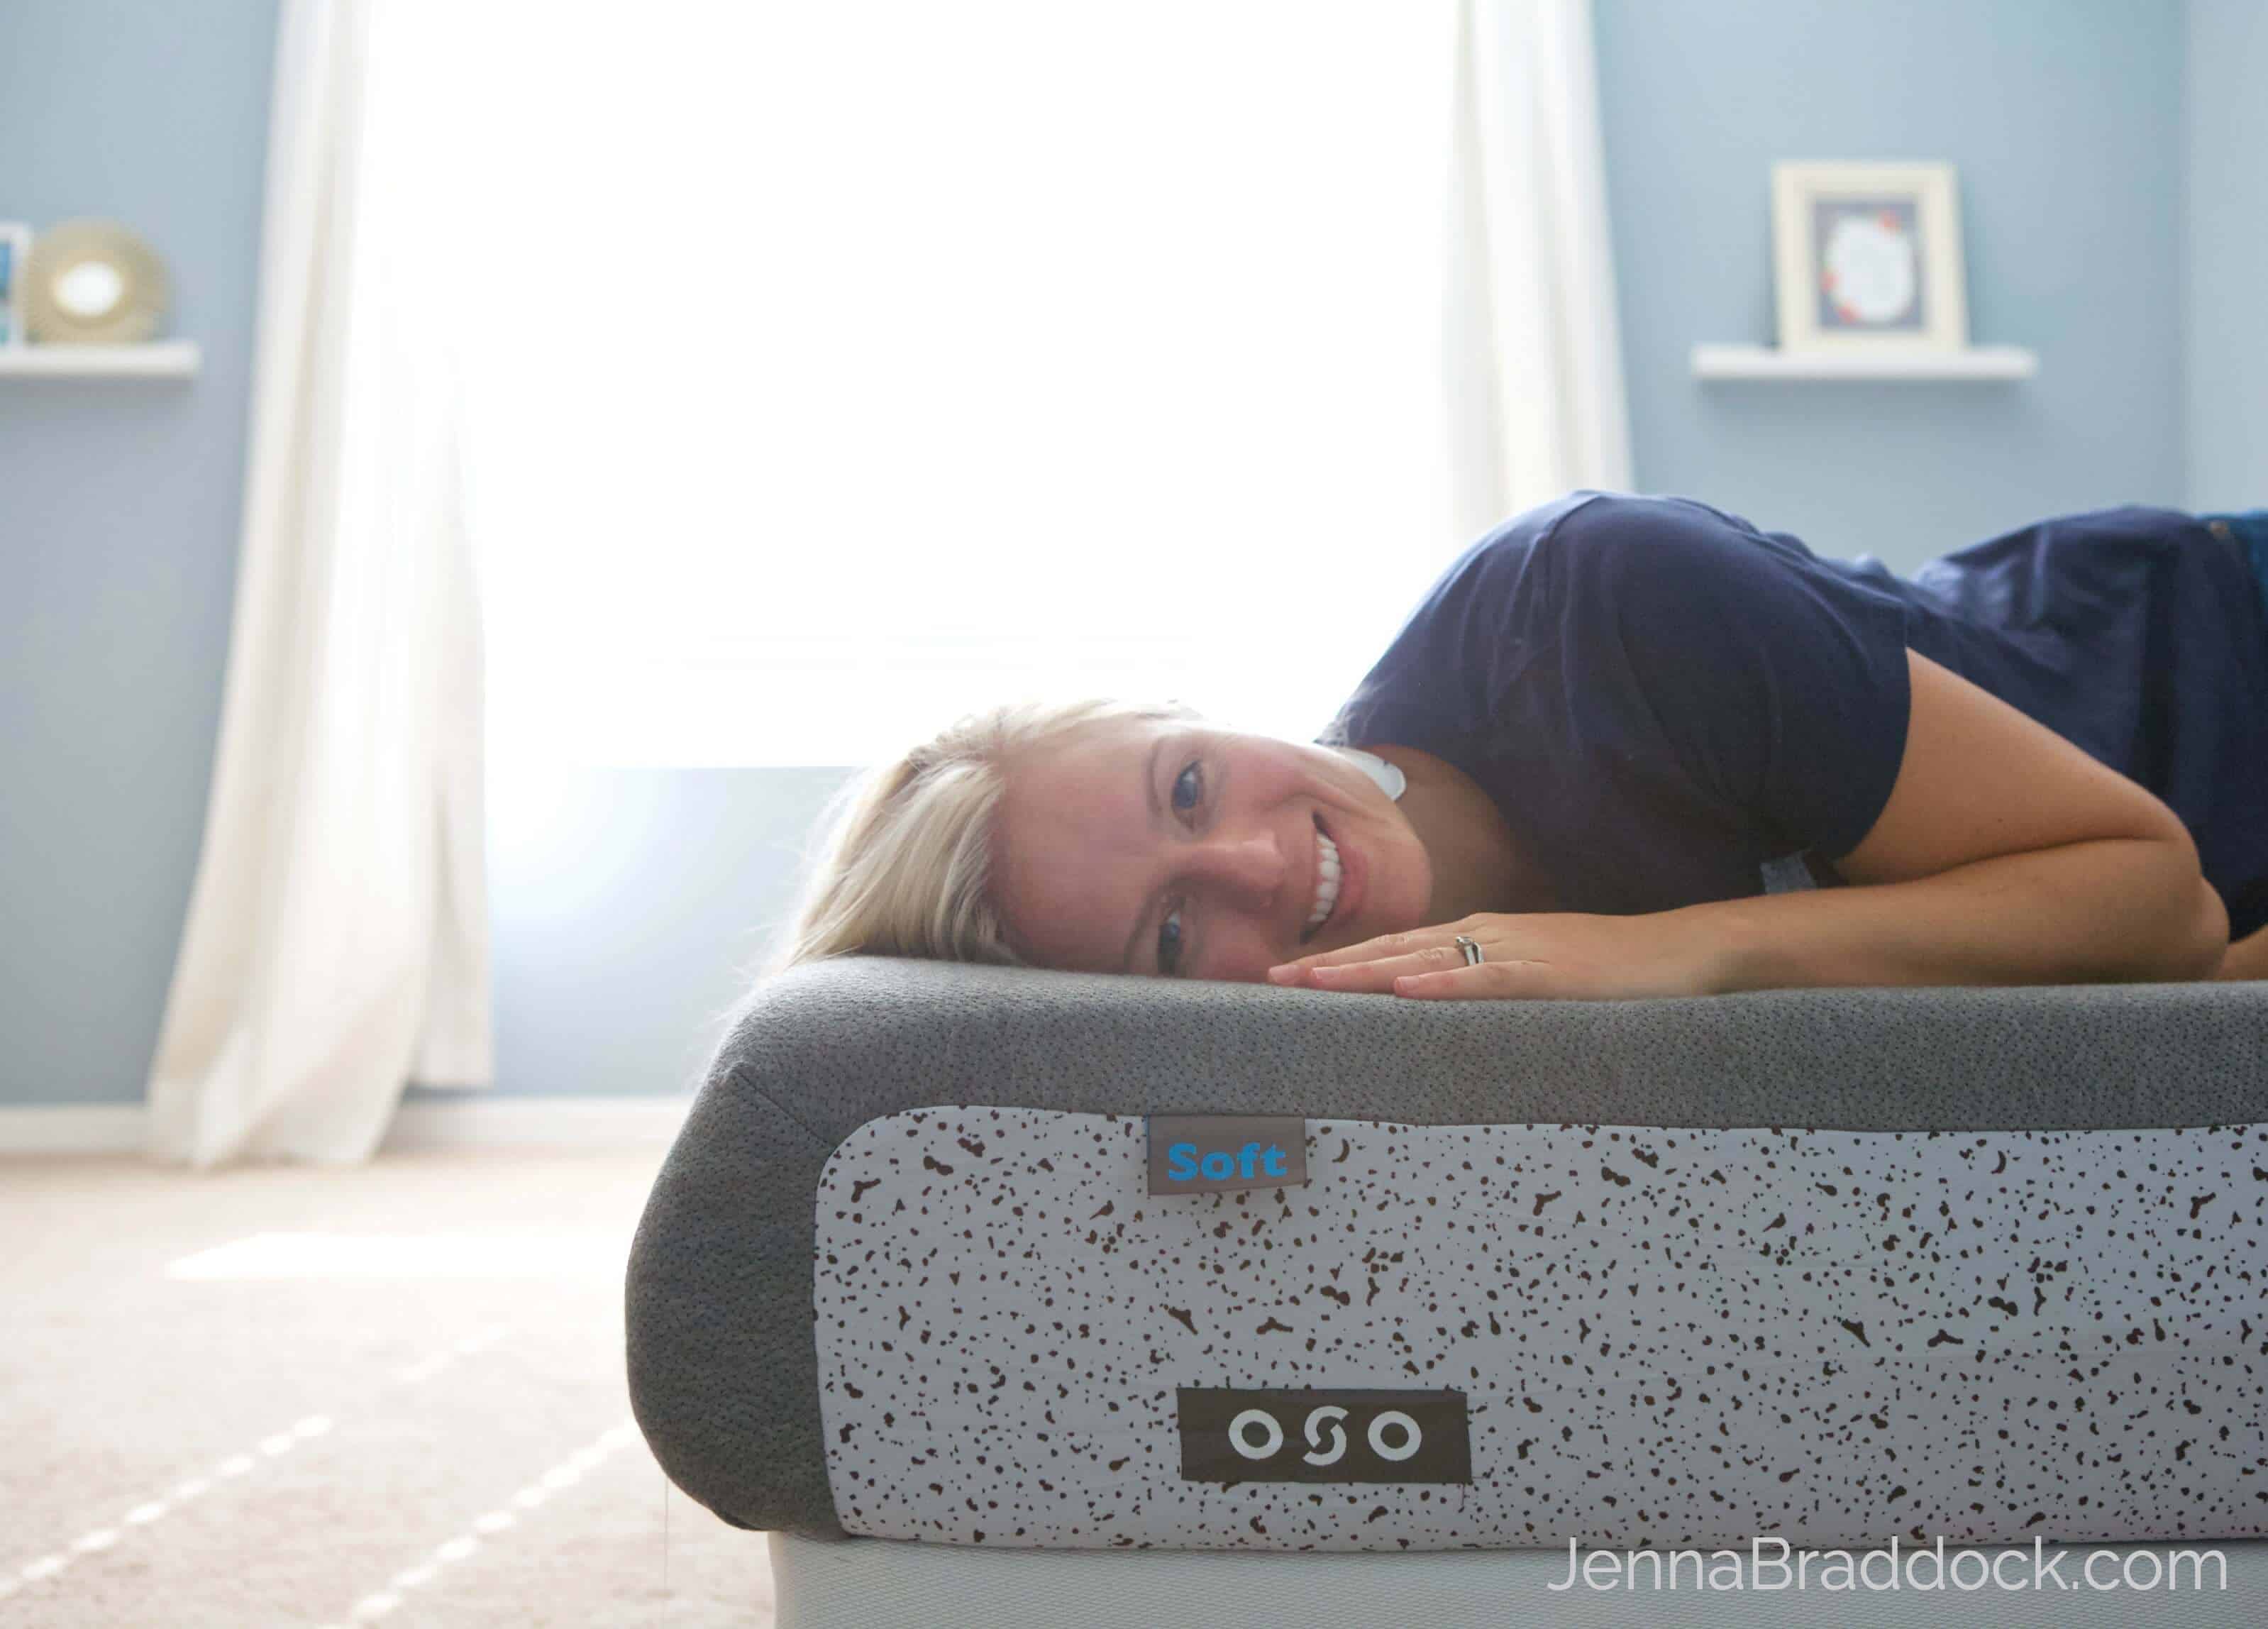 Sleep is a crucial component to total wellness that most people neglect. Here are 3 tips for better sleep that can be implemented almost immediately. Plus a review of the OSO mattress.